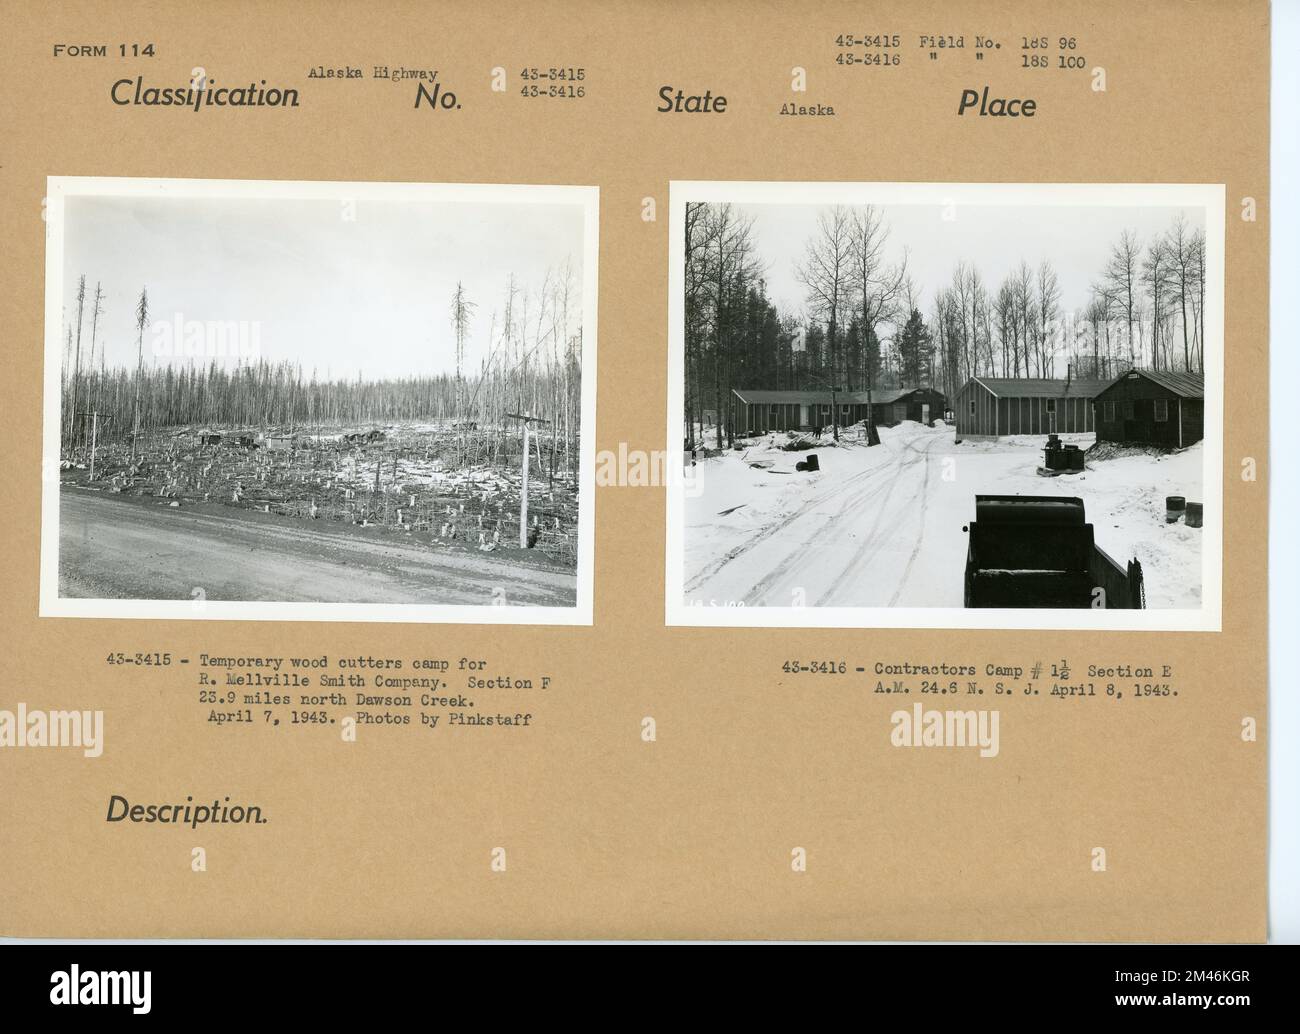 Temporary wood cutters camp for R. Melville Smith Company;. Original caption: 43-3415 - Temporary wood cutters camp for R. Mellville Smith Company. Section F 23.9 miles north Dawson Creek. April 7, 1943. Photos by Pinkstaff. Original caption: 43-3416 - Contractors Camp #1 1/2 Section E A.M. 24.6 N.S.J. April 8, 1943. State: Alaska. Stock Photo